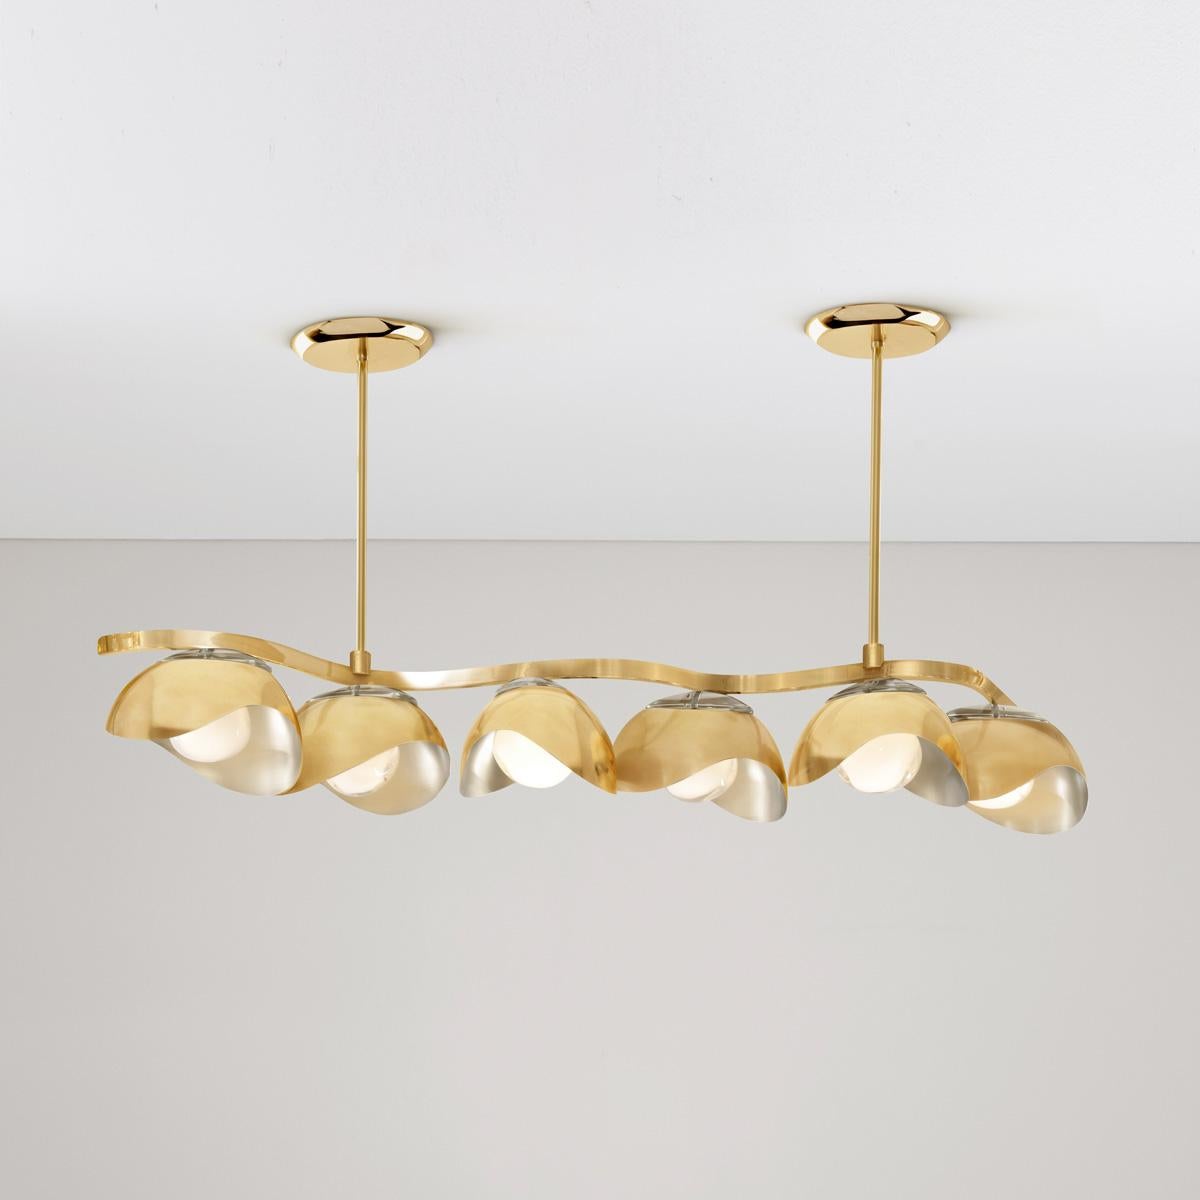 Modern Serpente Ceiling Light by Gaspare Asaro- Brass Finish For Sale